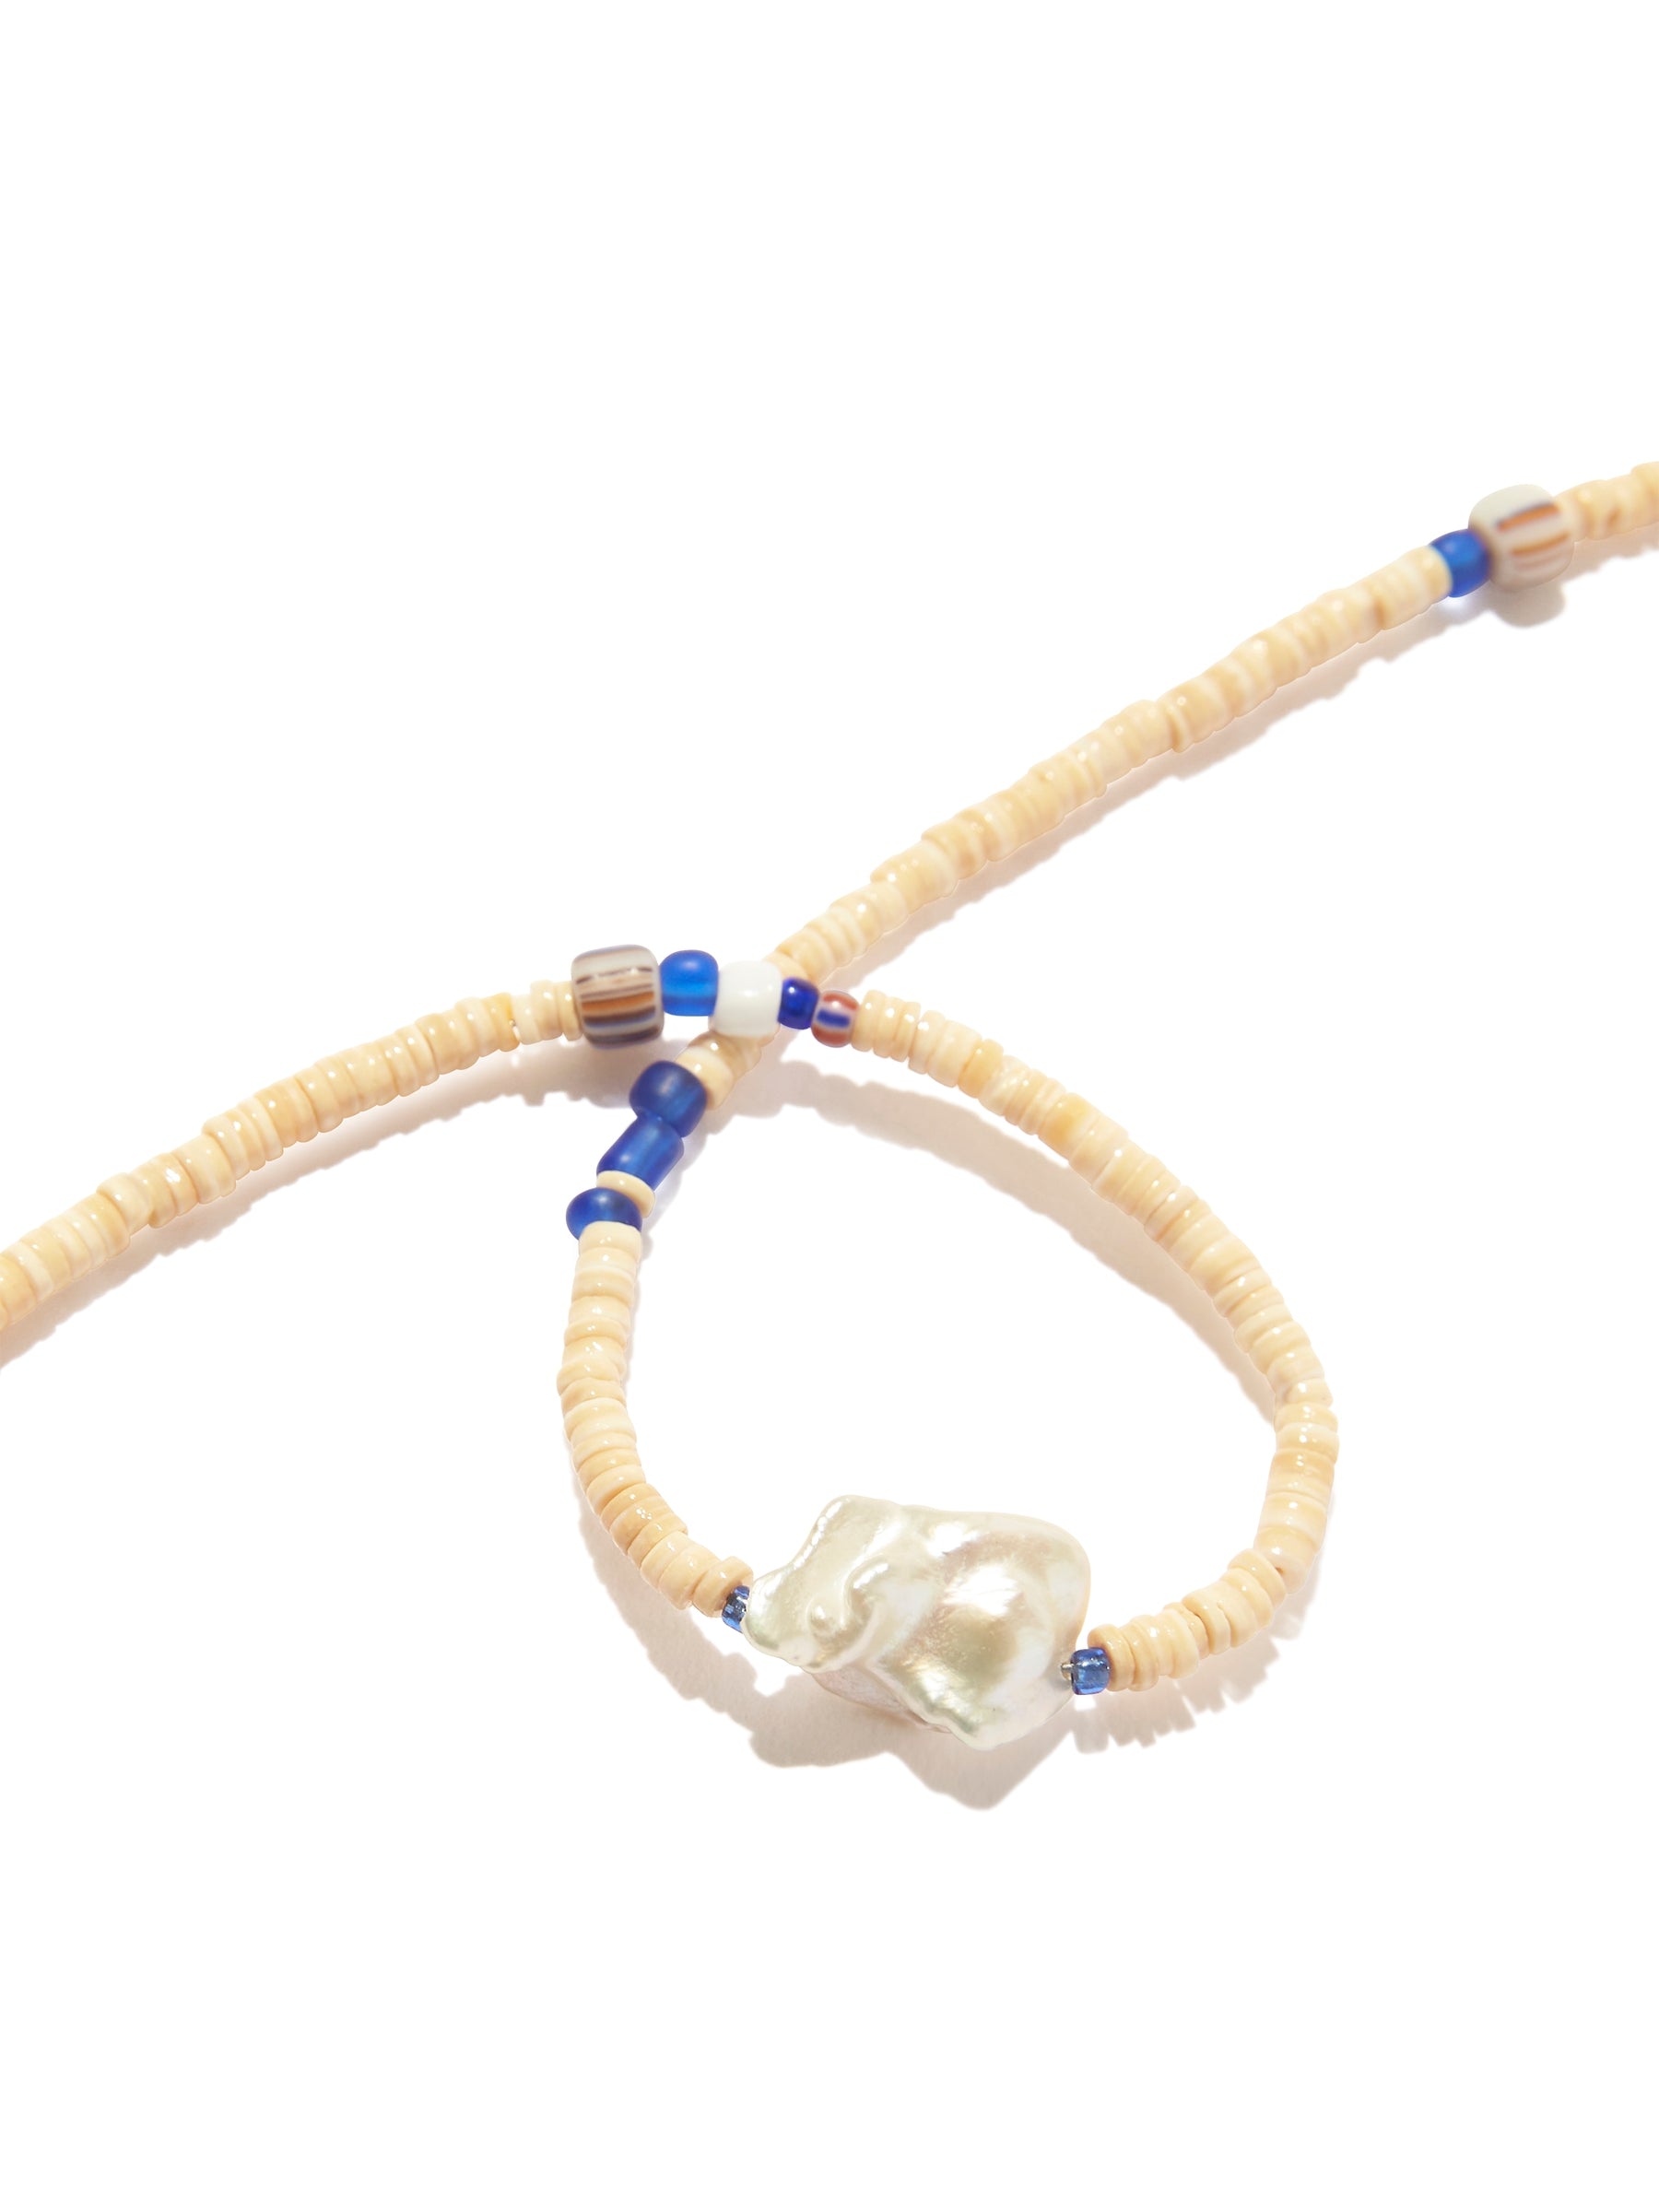 White Puka Shell Necklace - (1 necklace 18 inches x 4-5mm)